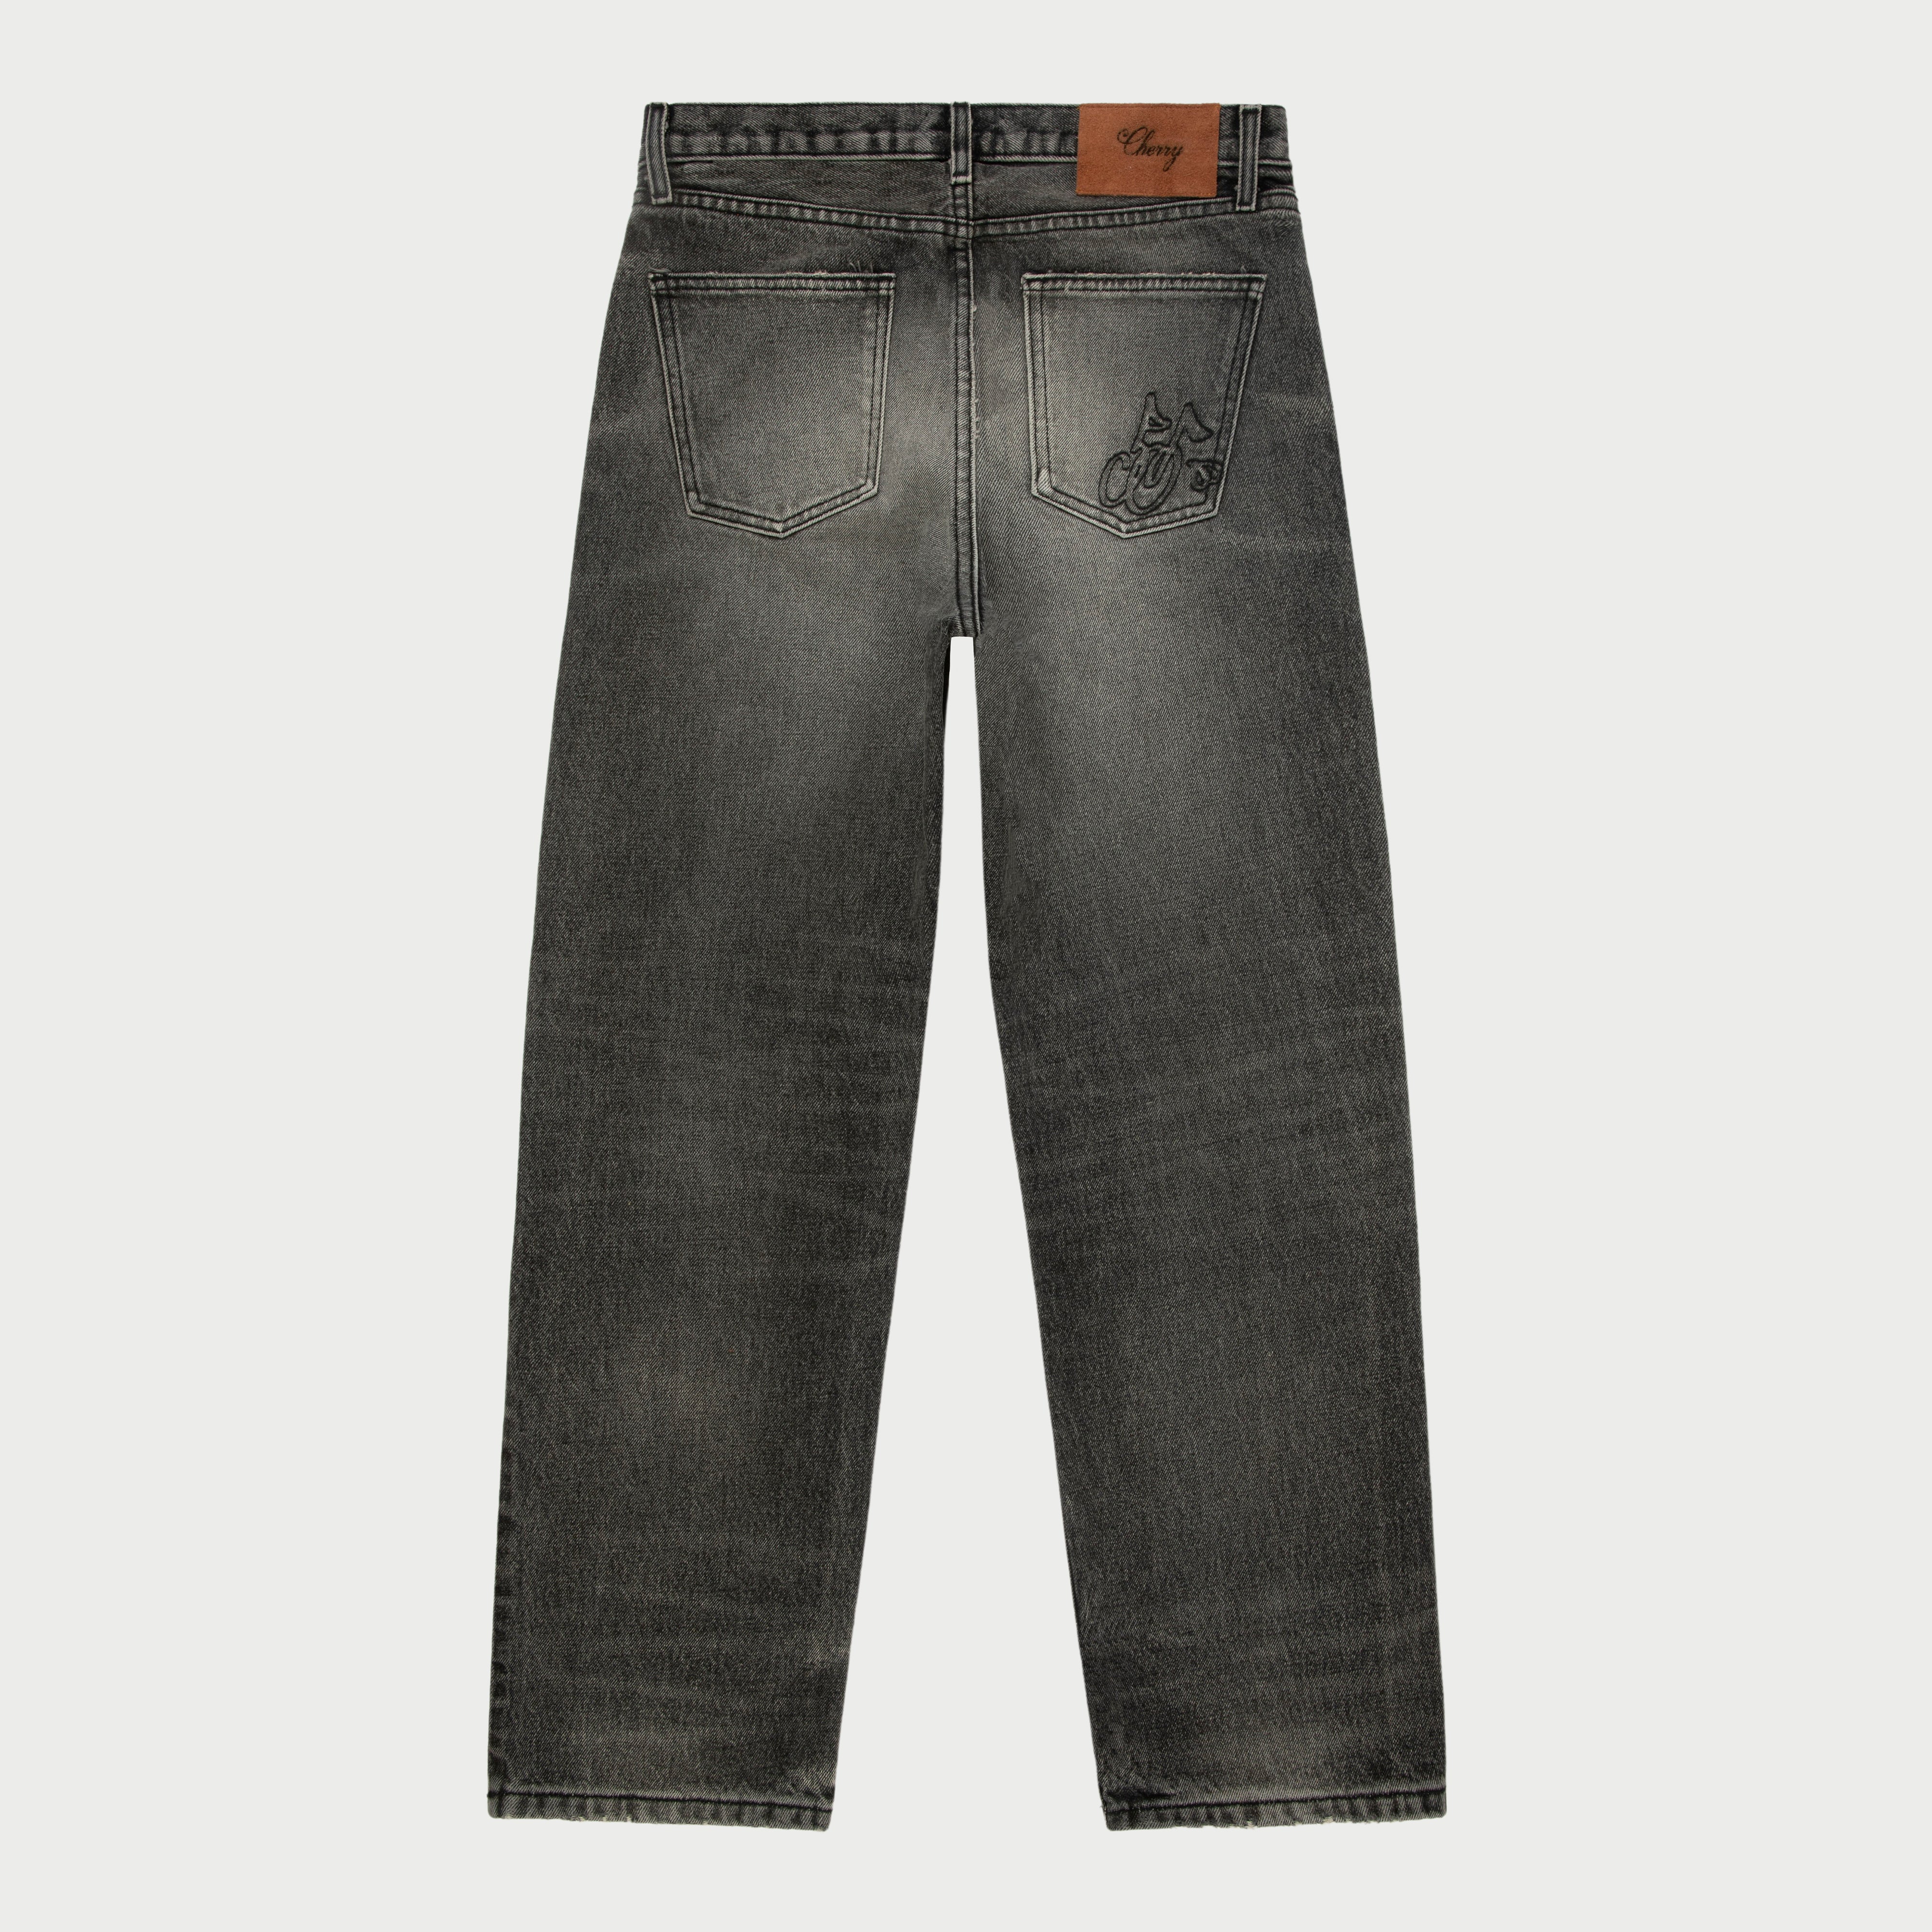 RELAXED_5_POCKET_JEANS_GREY_2.jpg